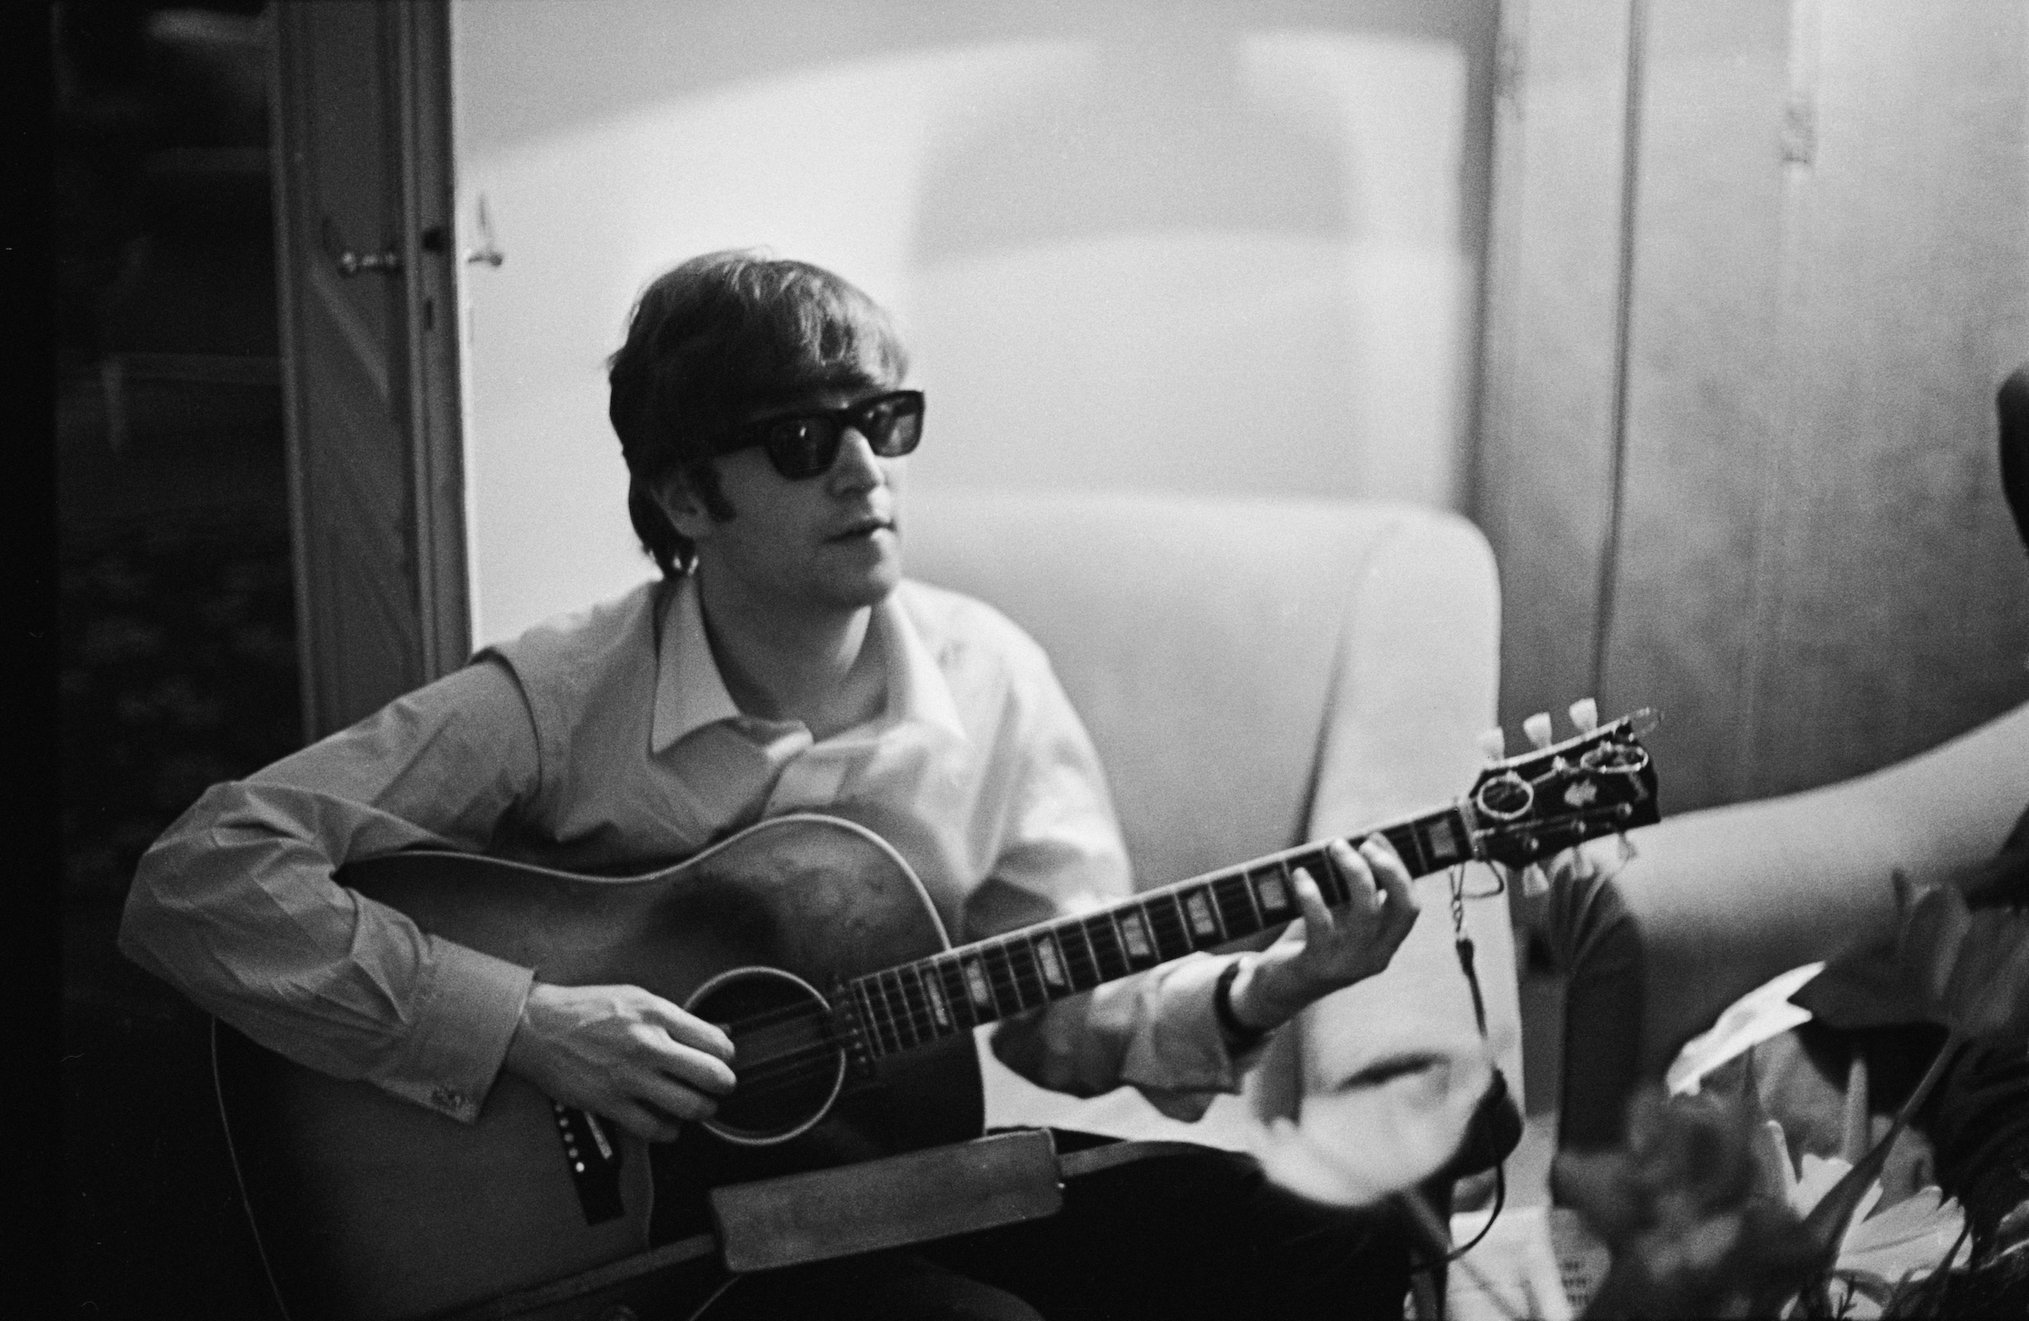 John Lennon plays the guitar in a hotel in Paris in 1964